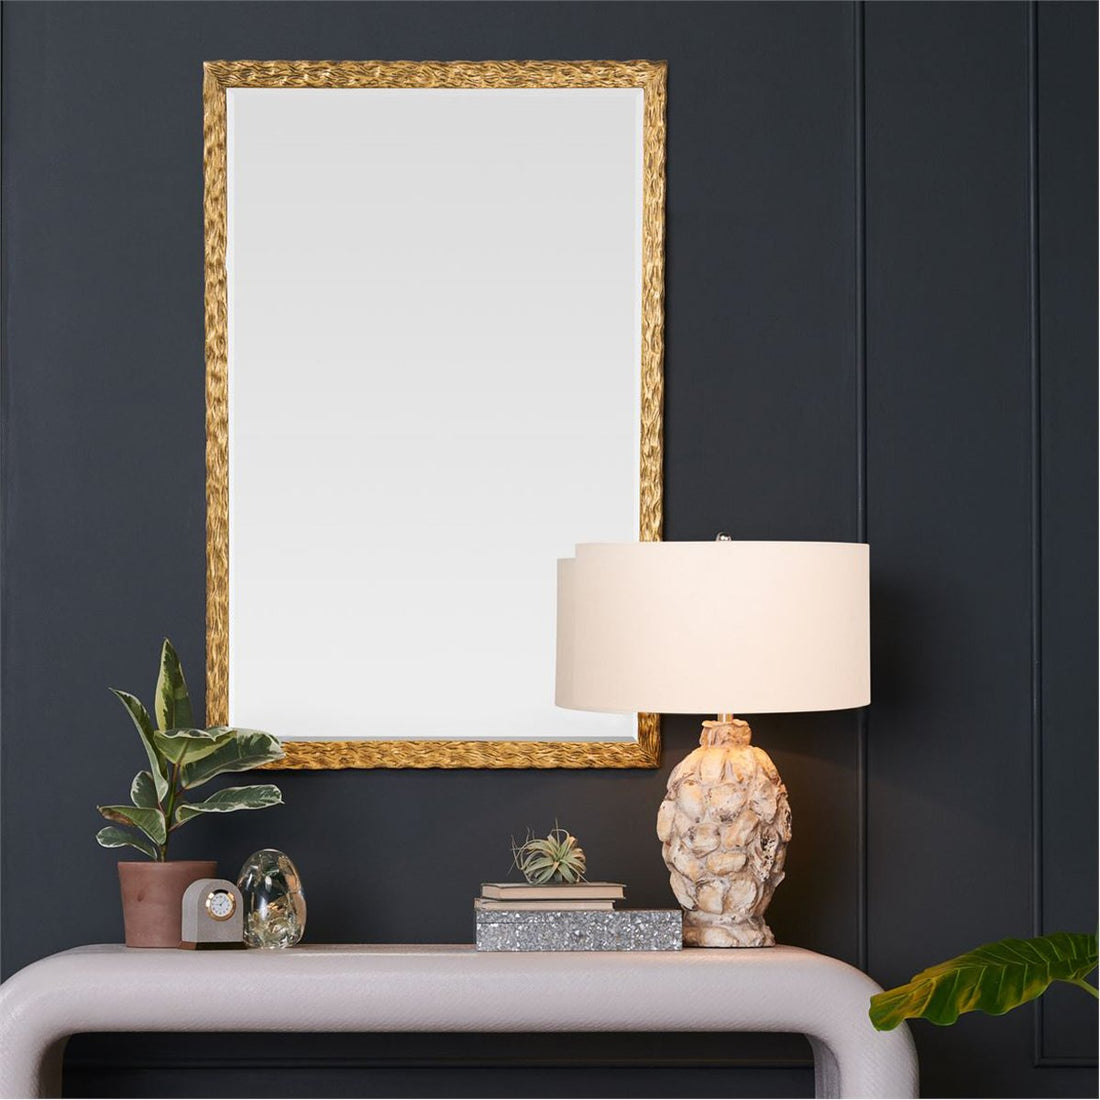 Made Goods Wardell Patterned Metal Mirror